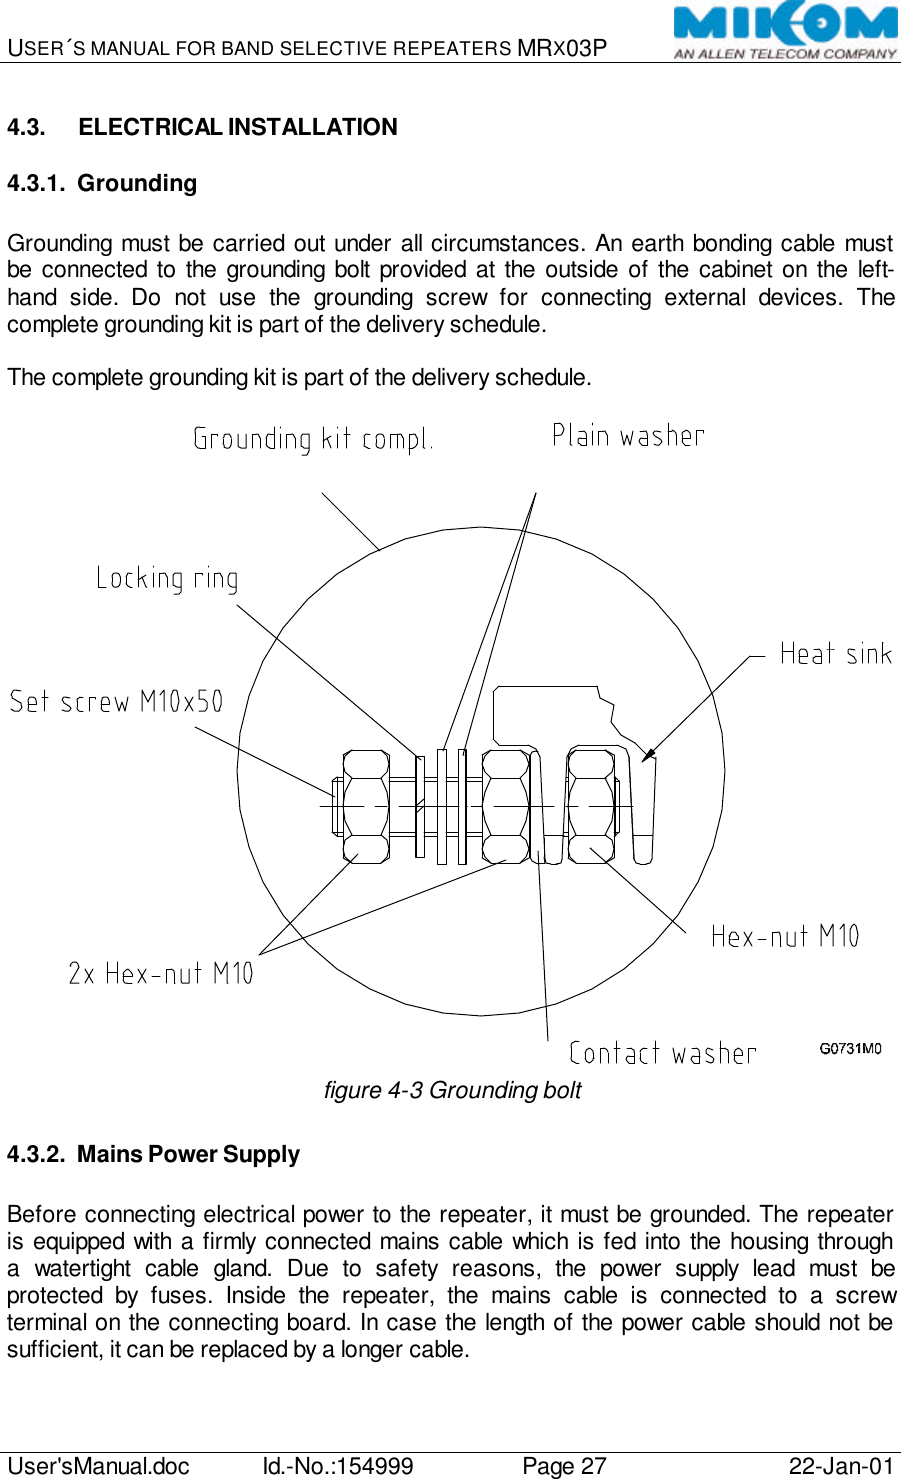 USER´S MANUAL FOR BAND SELECTIVE REPEATERS MRX03P   User&apos;sManual.doc Id.-No.:154999 Page 27 22-Jan-01  4.3. ELECTRICAL INSTALLATION 4.3.1. Grounding  Grounding must be carried out under all circumstances. An earth bonding cable must be connected to the grounding bolt provided at the outside of the cabinet on the left-hand side. Do not use the grounding screw for connecting external devices. The complete grounding kit is part of the delivery schedule.  The complete grounding kit is part of the delivery schedule.   figure 4-3 Grounding bolt 4.3.2. Mains Power Supply  Before connecting electrical power to the repeater, it must be grounded. The repeater is equipped with a firmly connected mains cable which is fed into the housing through a watertight cable gland. Due to safety reasons, the power supply lead must be protected by fuses. Inside the repeater, the mains cable is connected to a screw terminal on the connecting board. In case the length of the power cable should not be sufficient, it can be replaced by a longer cable. 